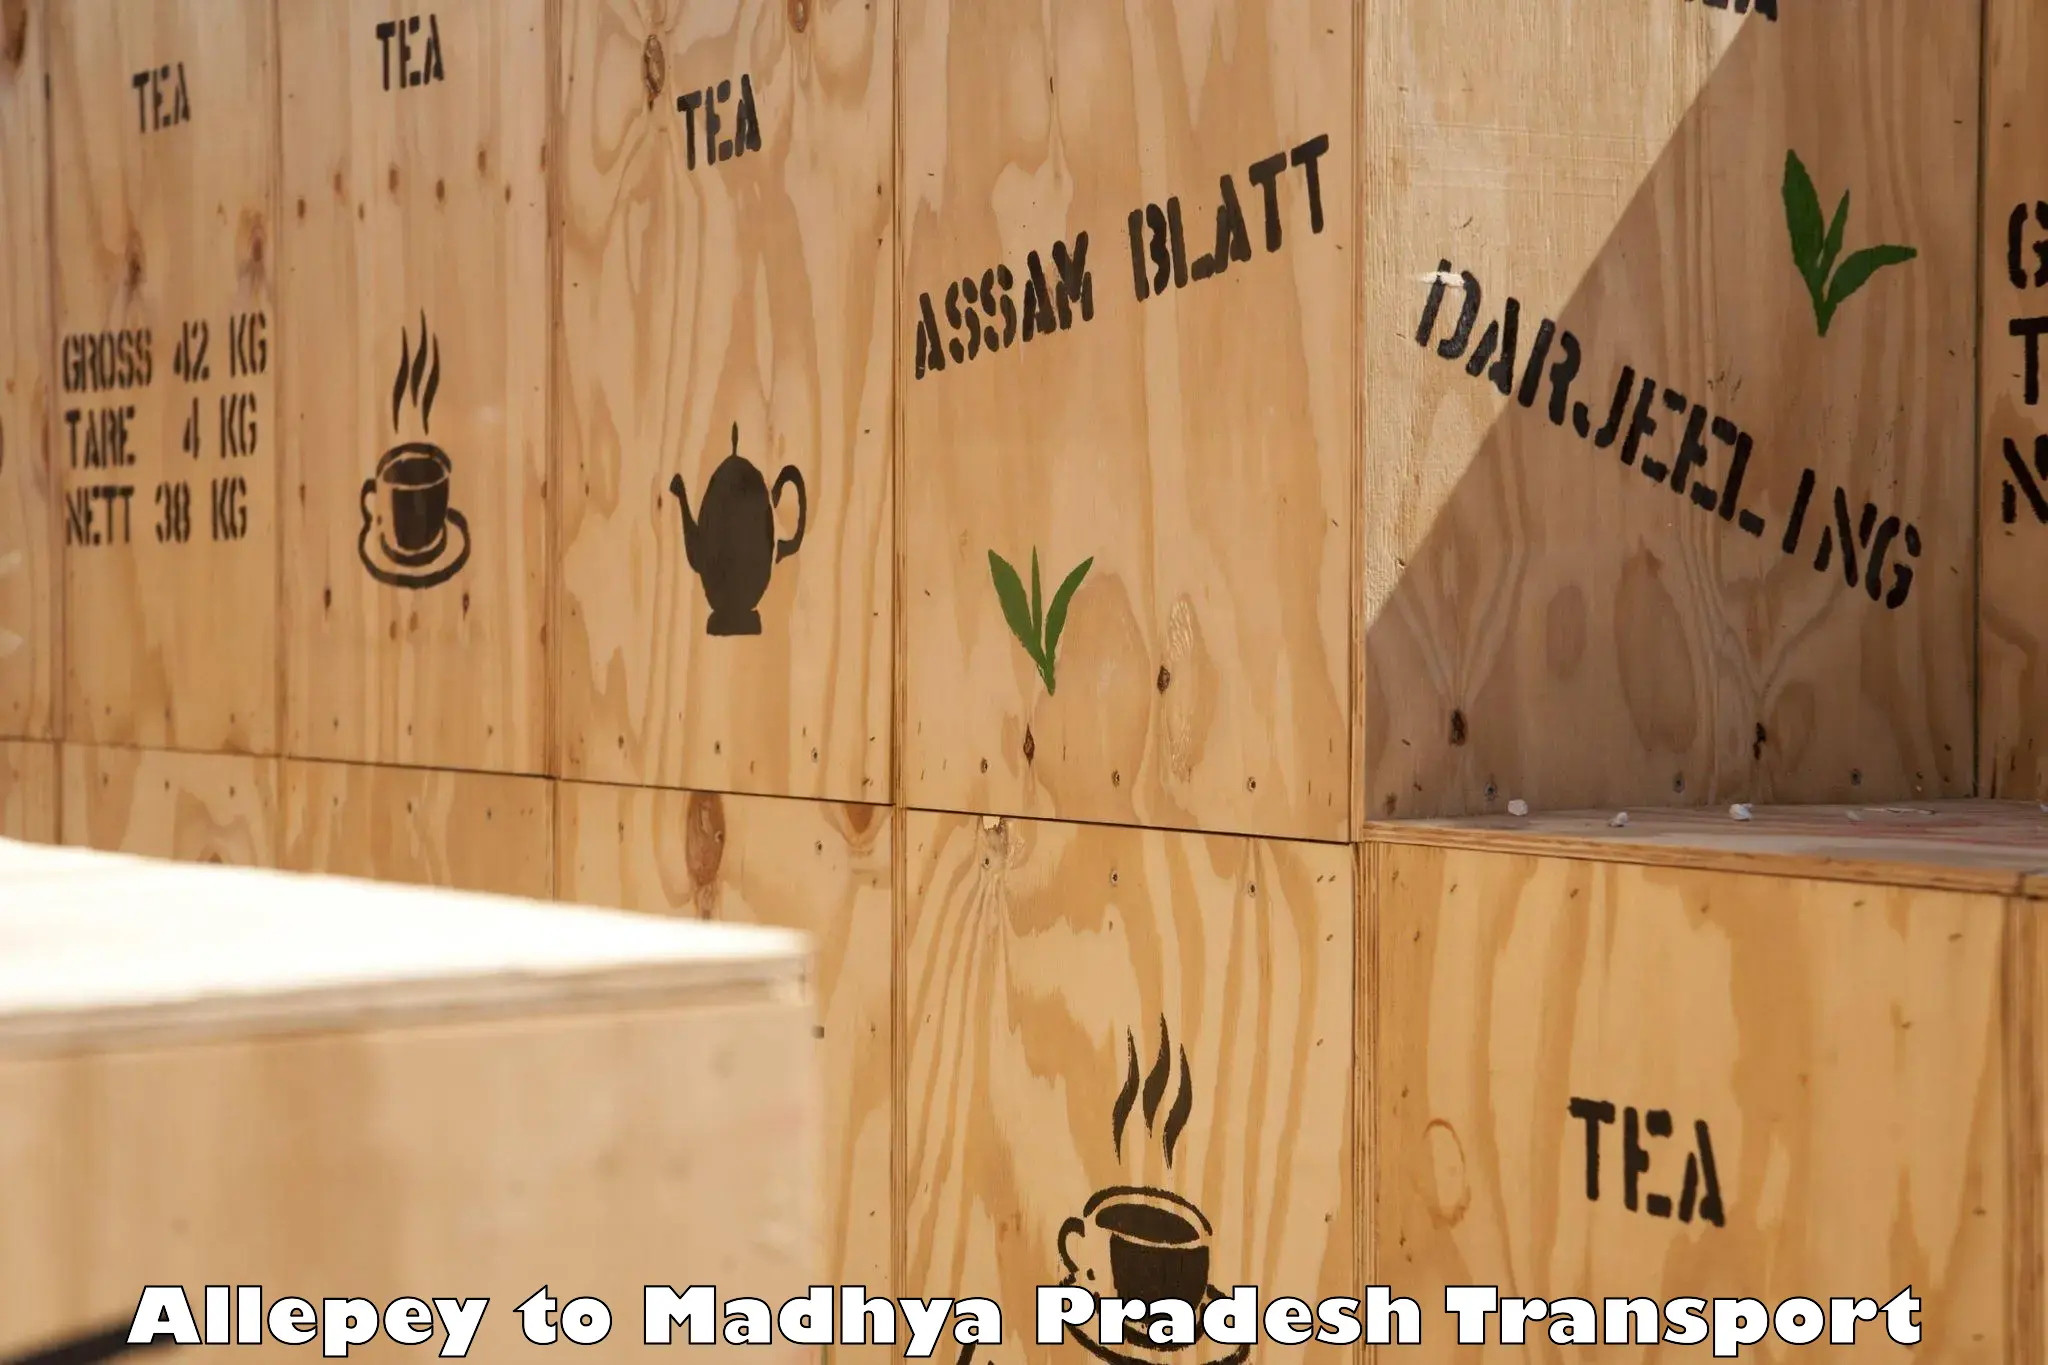 Express transport services Allepey to Sidhi